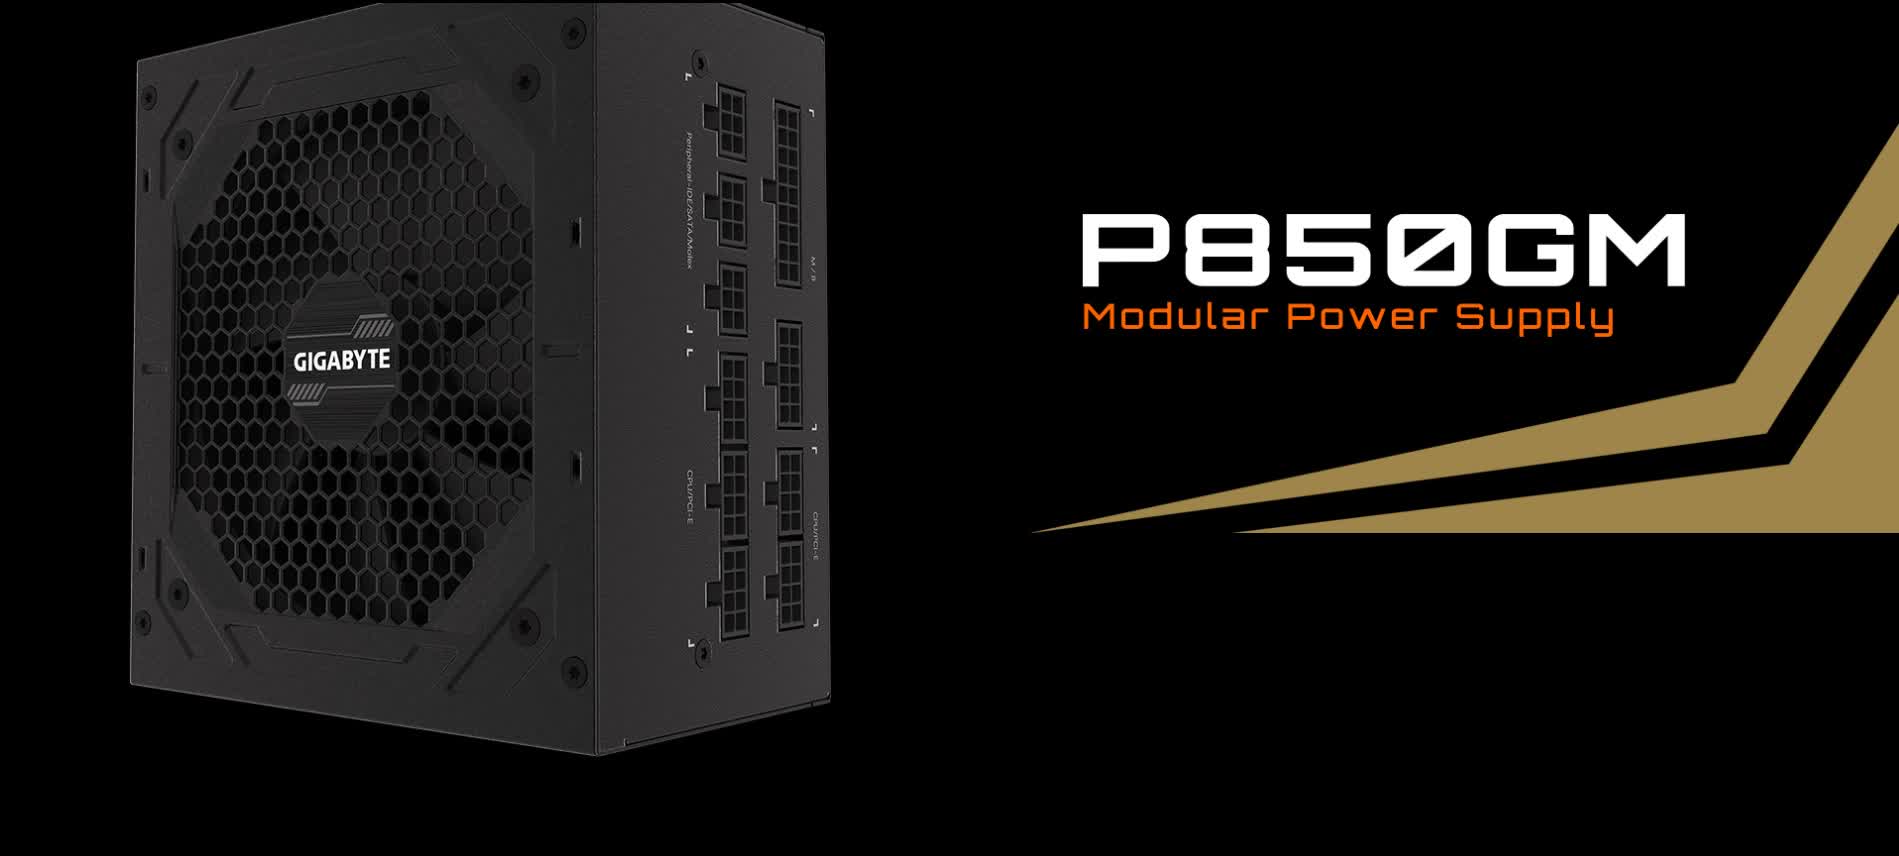 Gigabyte releases a statement on failing (and exploding) power supply models